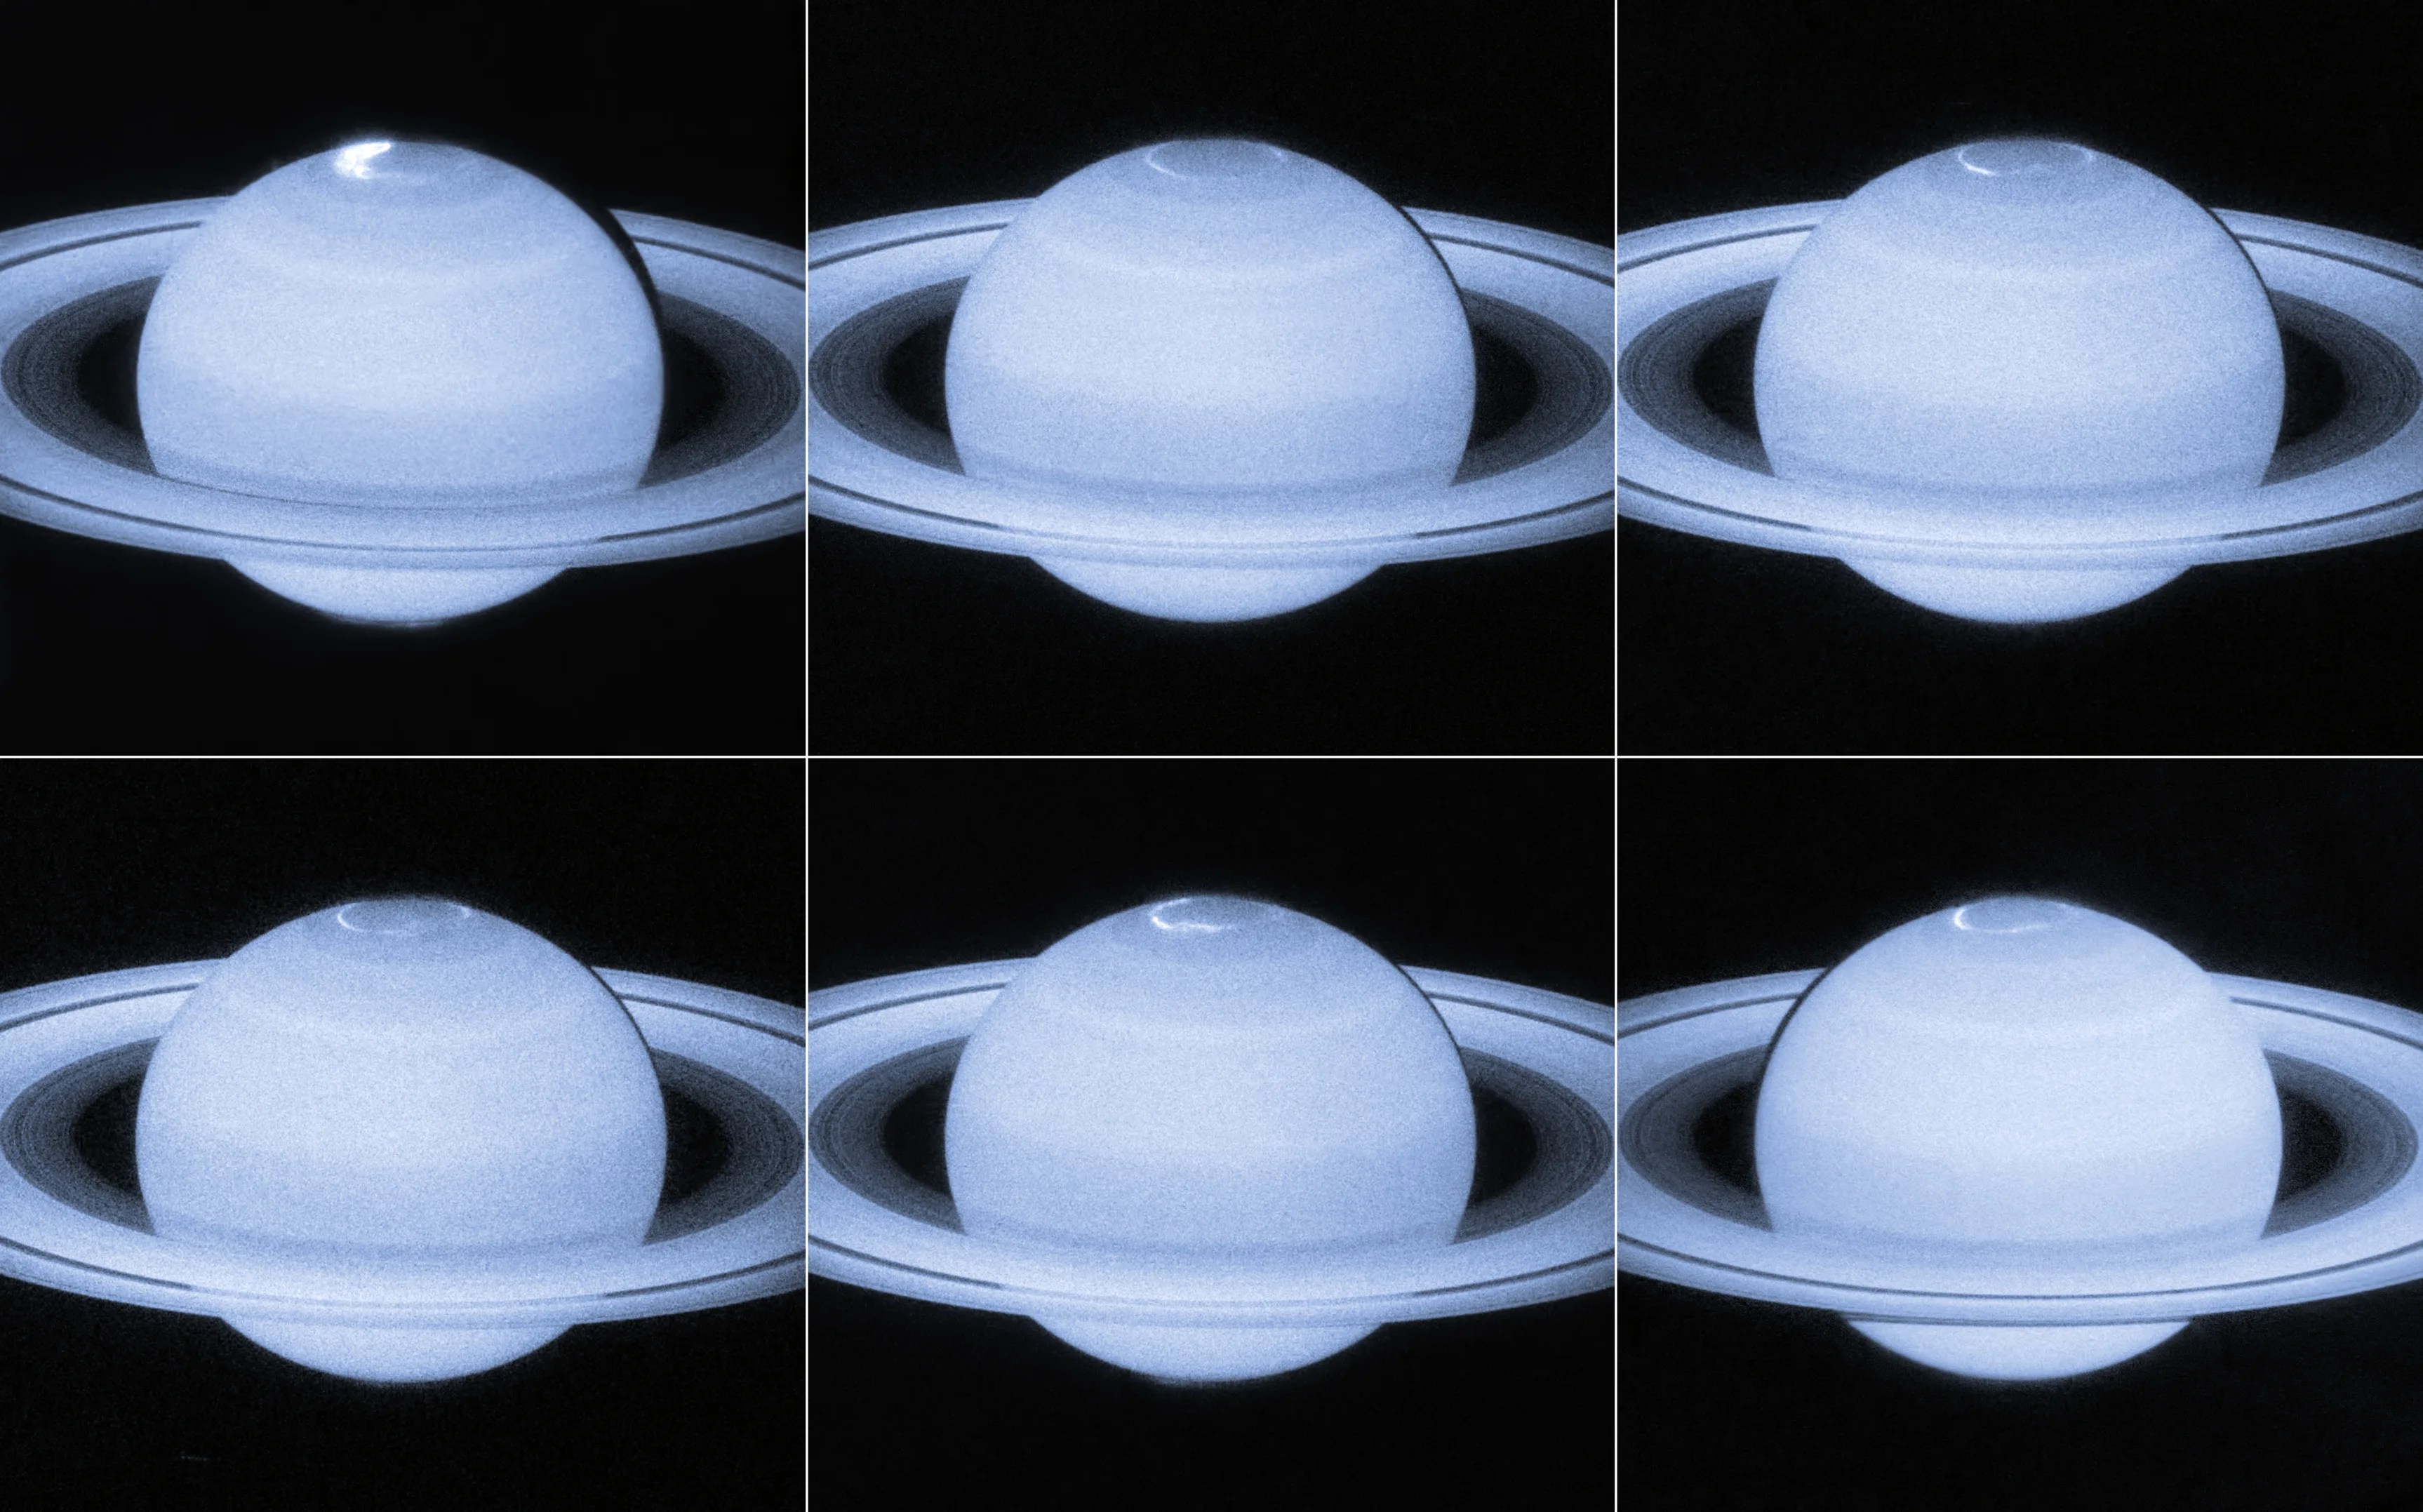 6 Hubble views of Saturn in ultraviolet light, all appearing pale blue. They're arranged in two rows of three pictures each.